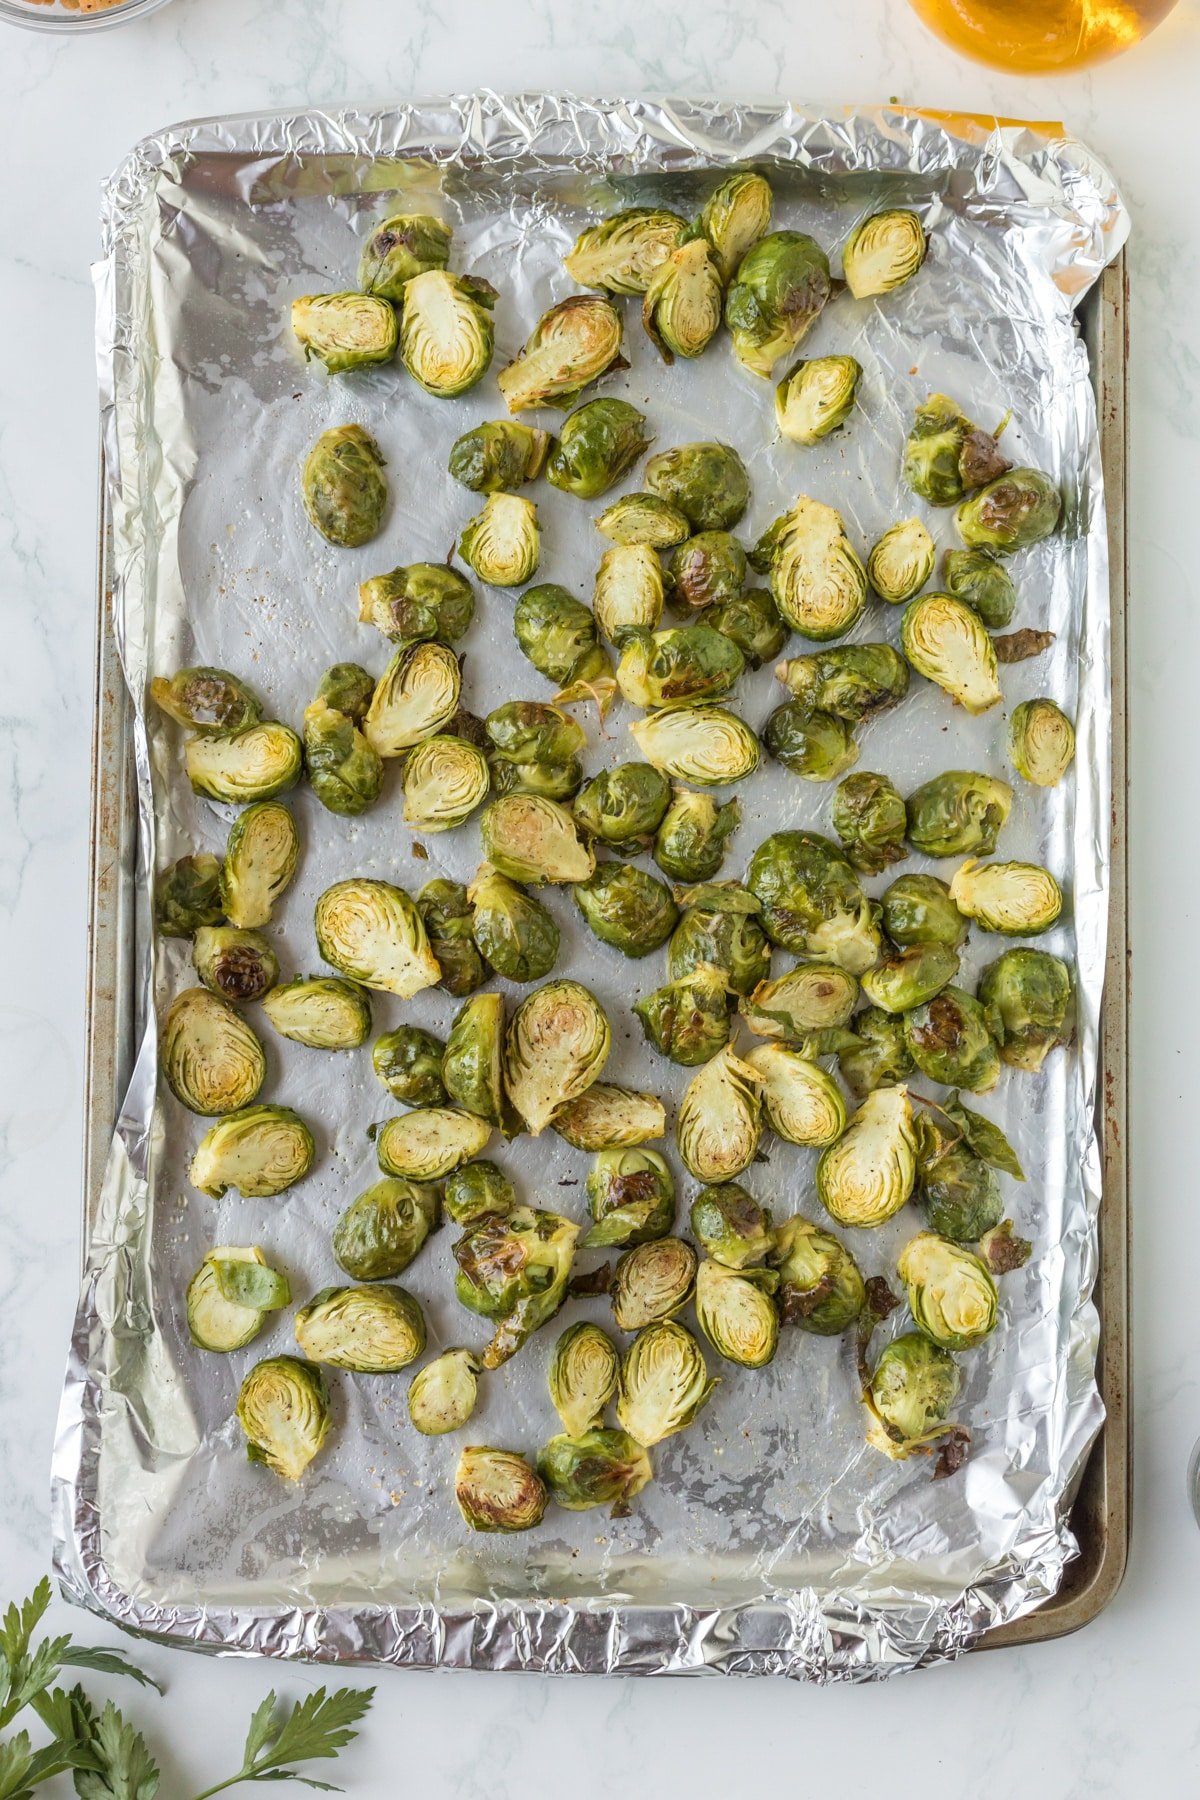 A foil-lined pan with roasted brussels sprouts.